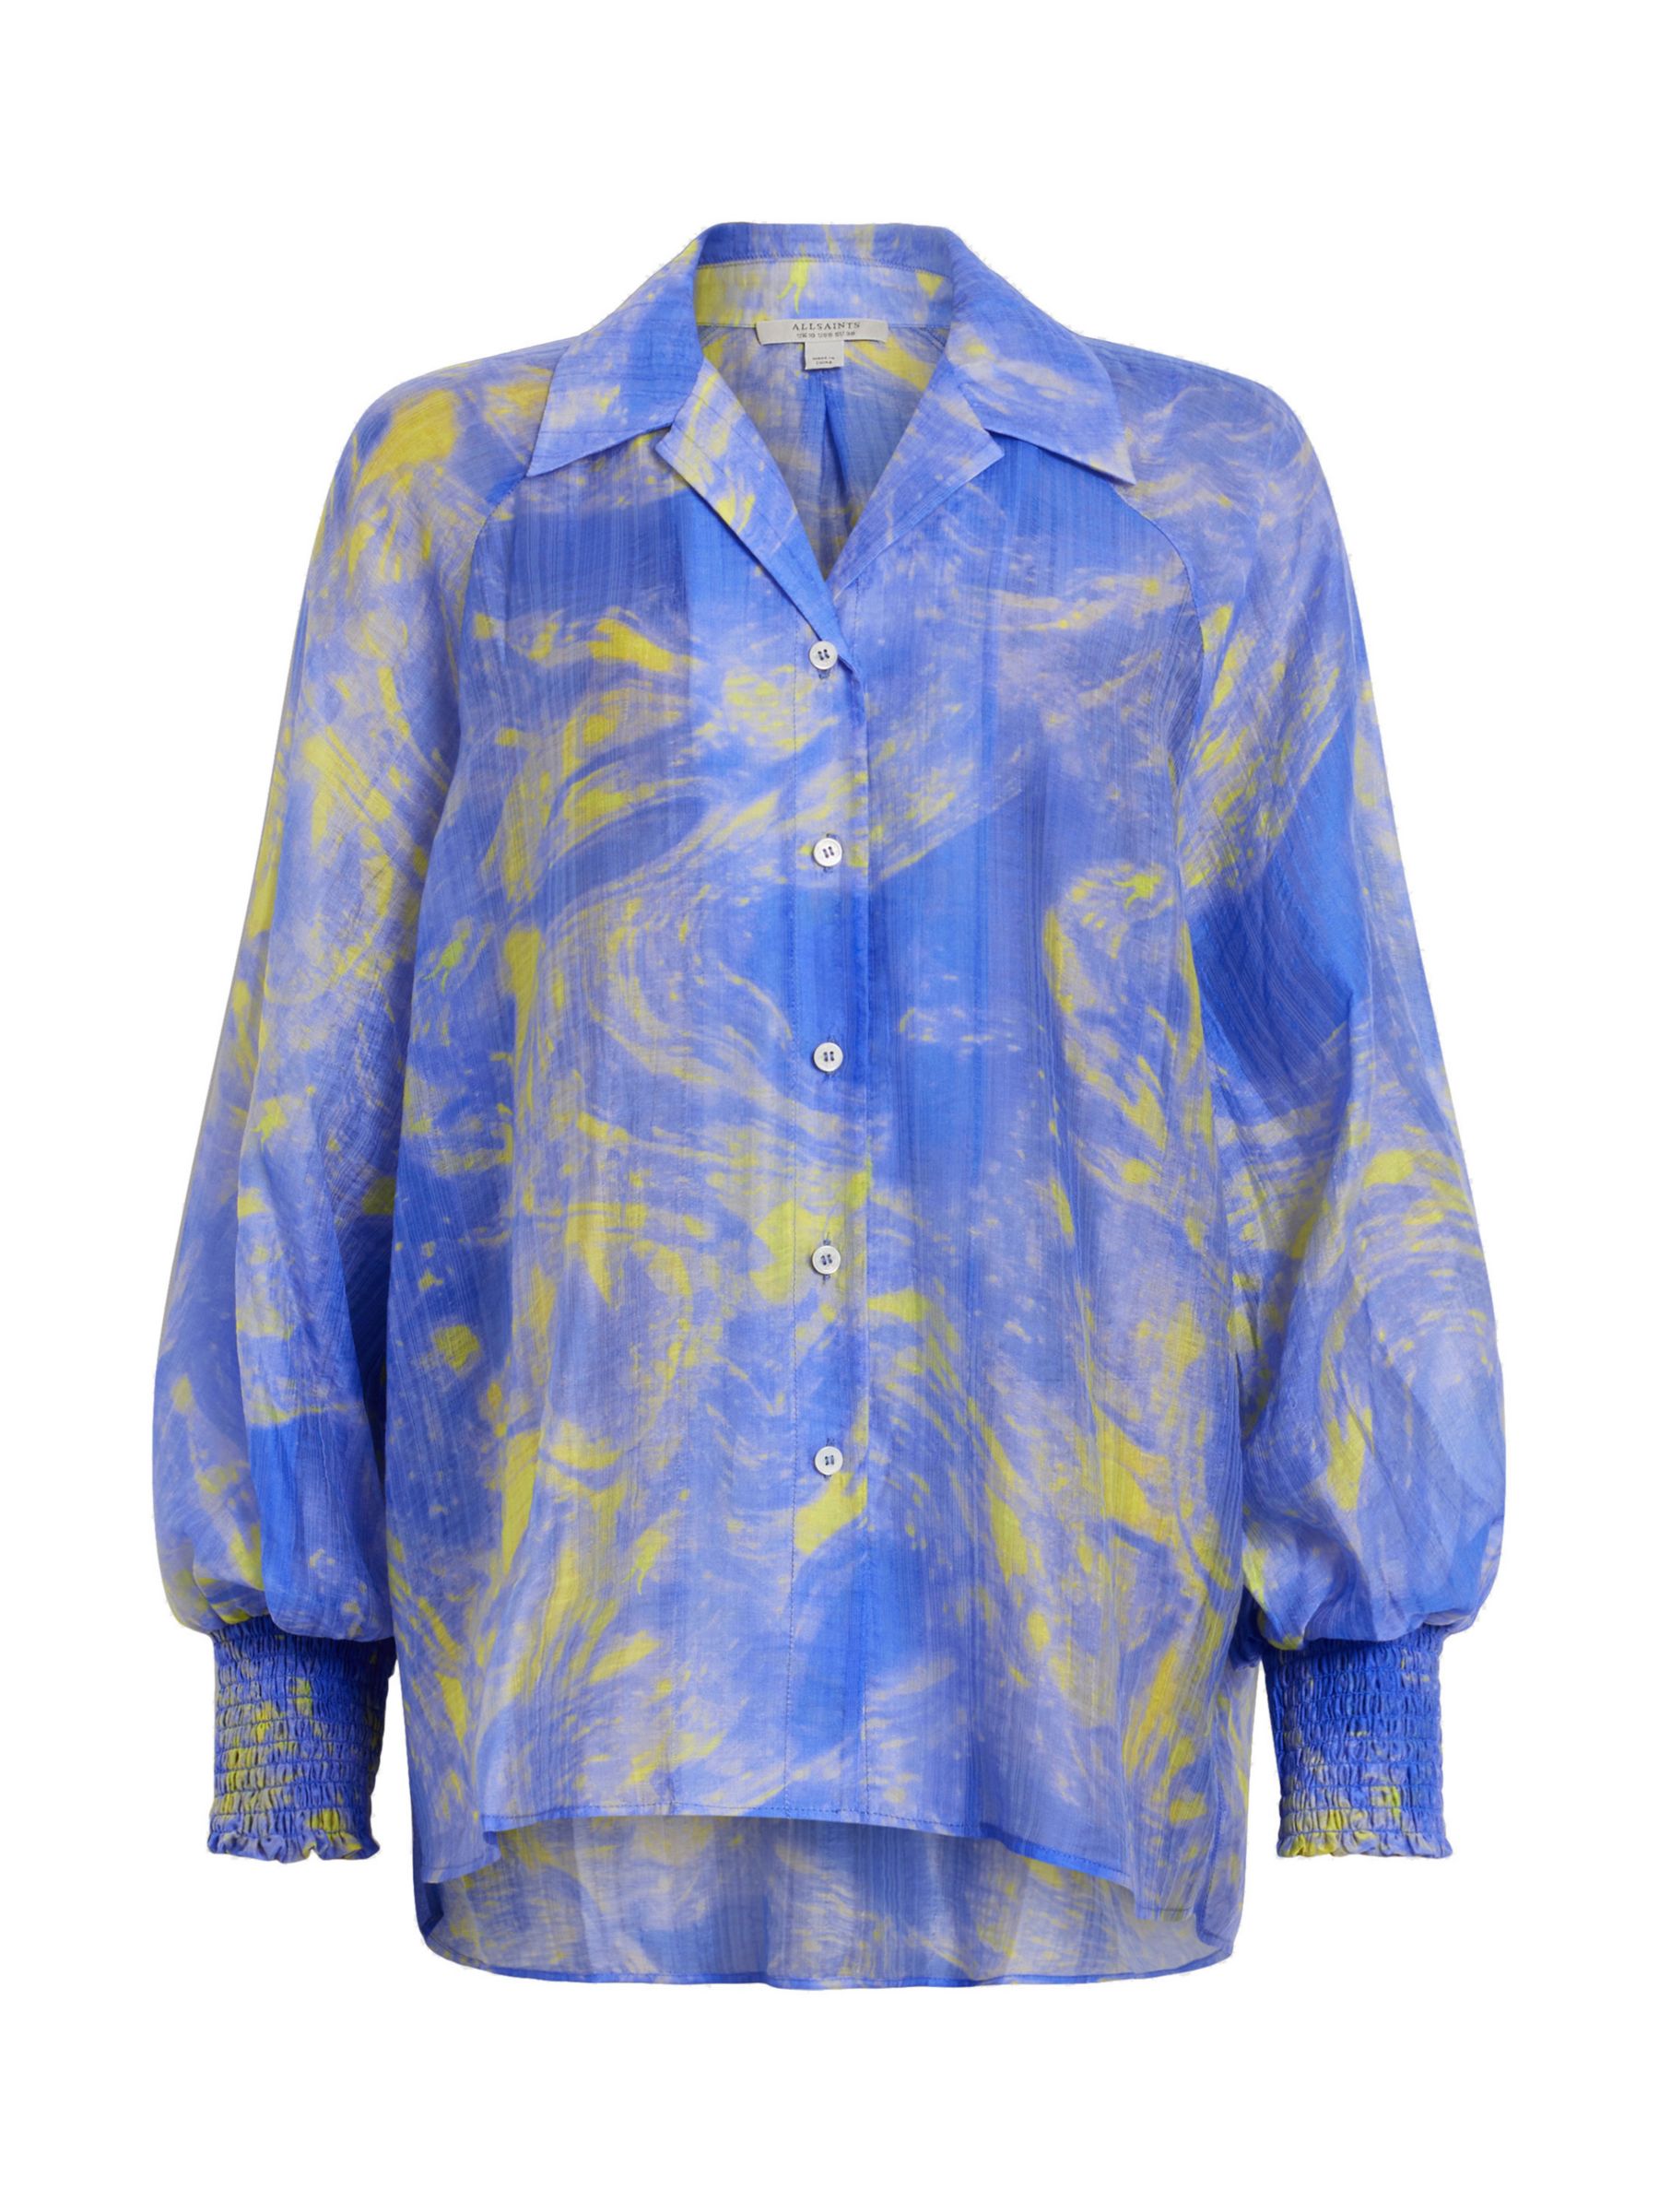 Buy AllSaints Isla Inspiral Abstract Print Shirt, Electric Blue/Yellow Online at johnlewis.com